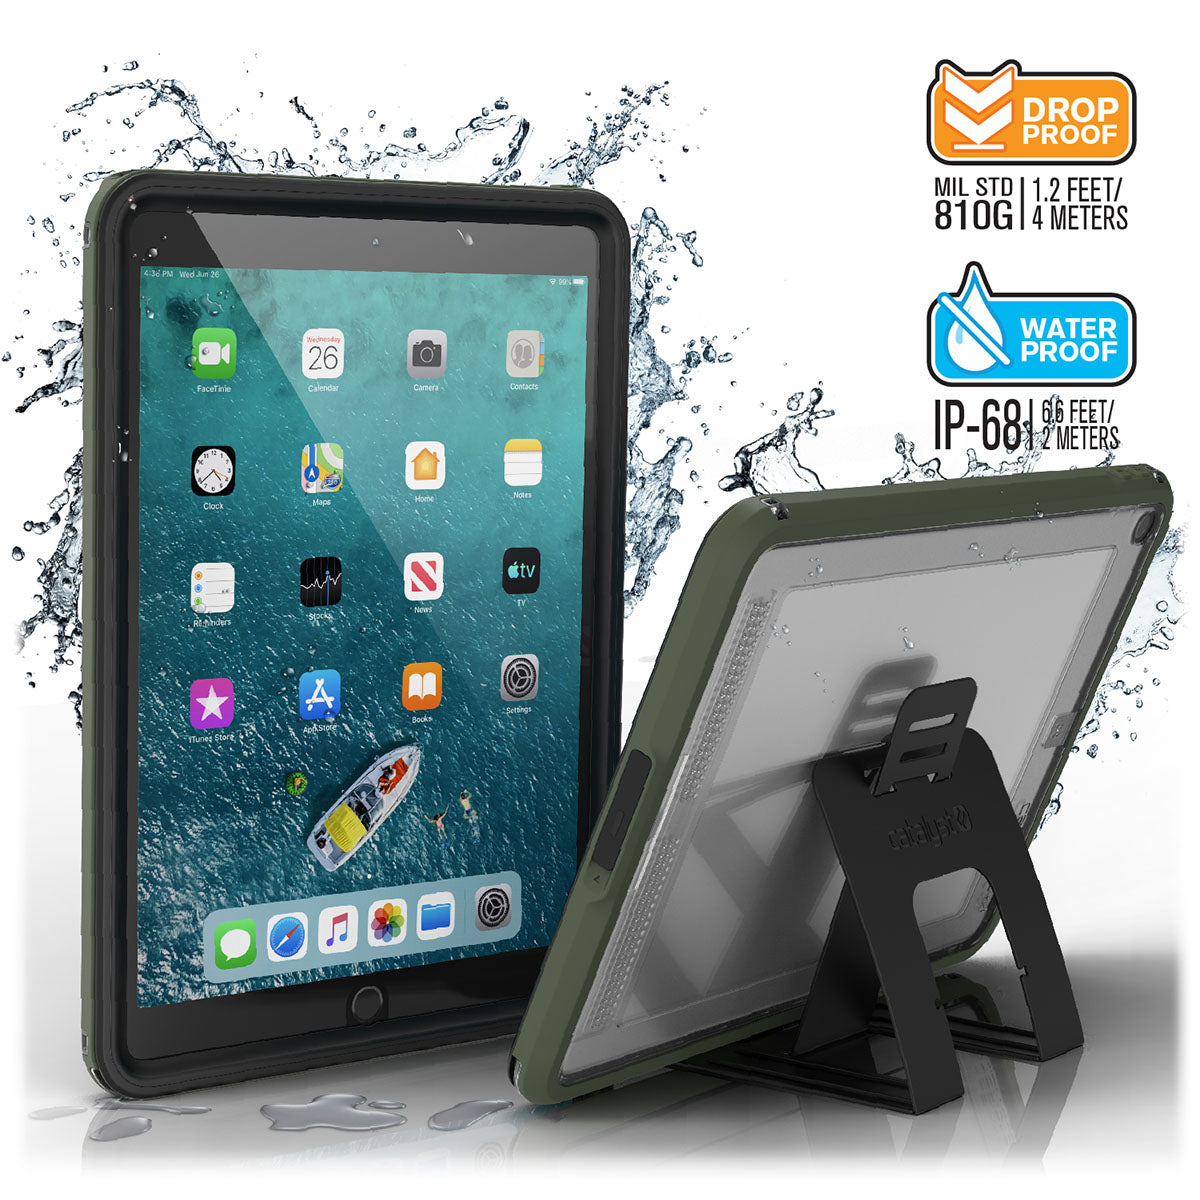 catalyst ipad air gen 3 10.5 waterproof case army green front and back view with stand and splashes of water text reads drop proof mil std 810g 1.2 feet 4 meters waterproof ip68 6.6 feet 2 meters